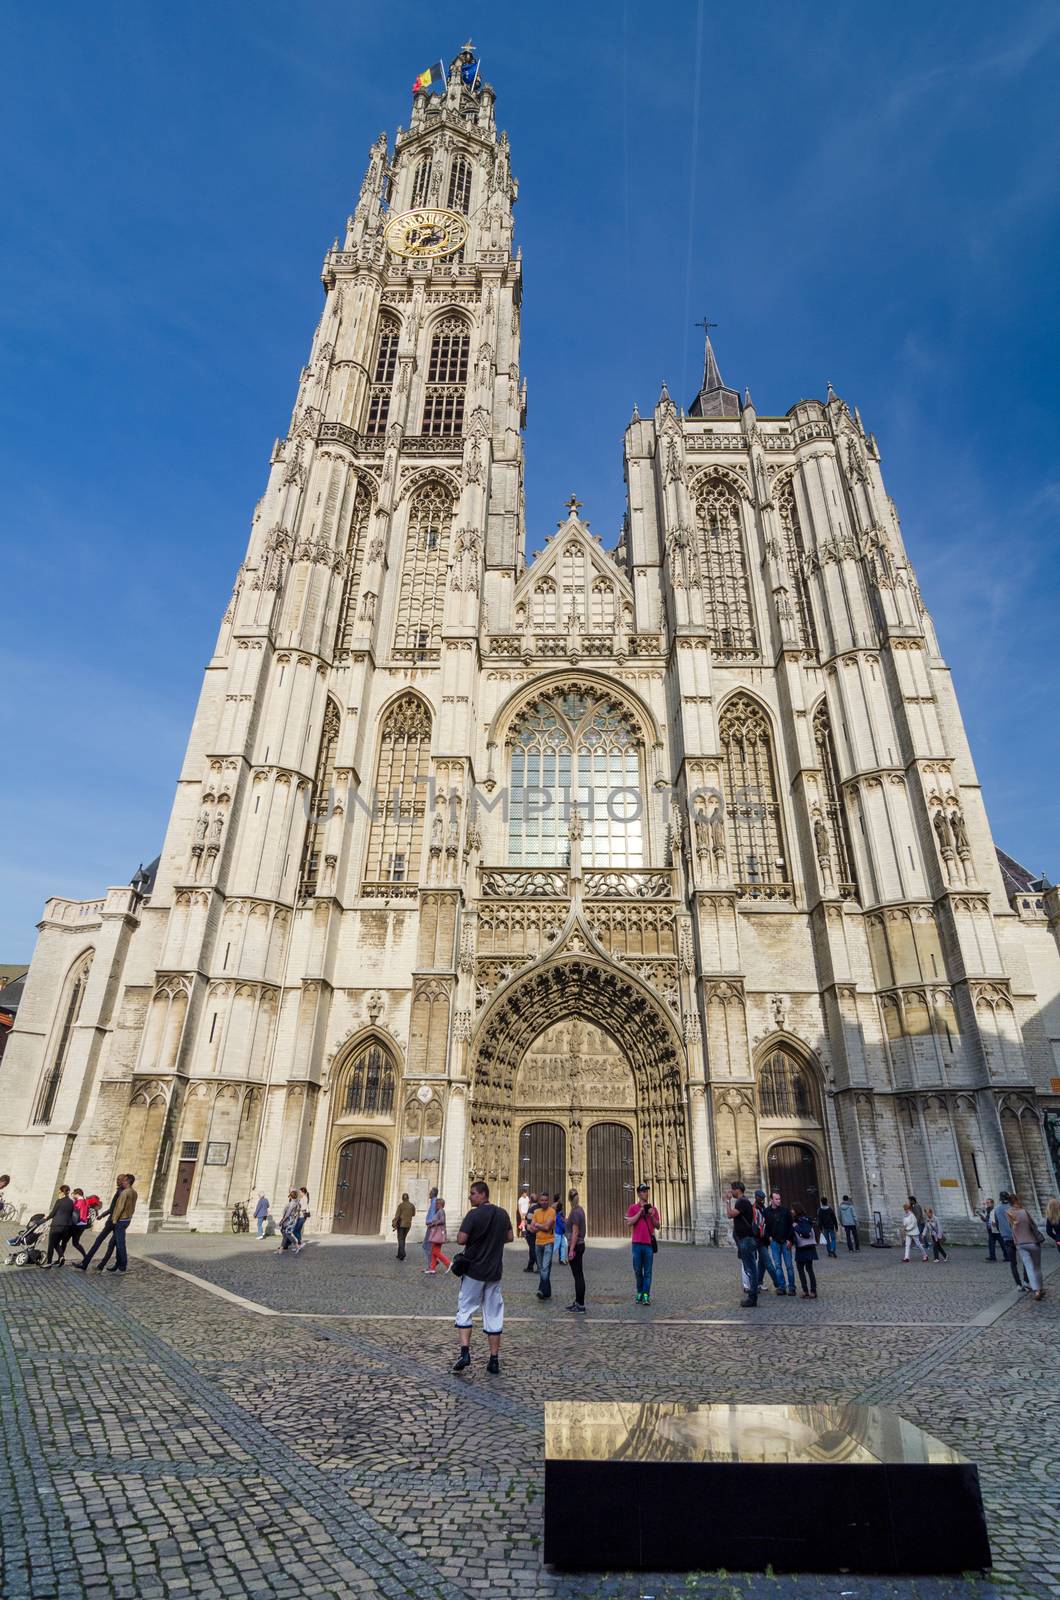 Antwerp, Belgium - May 10, 2015: Tourist visit Cathedral of Our Lady on May 10, 2015 in Antwerp, Belgium. The cathedral was completed in 1521 and this is the highest church in the Benelux with 123 m (404 ft) of height.